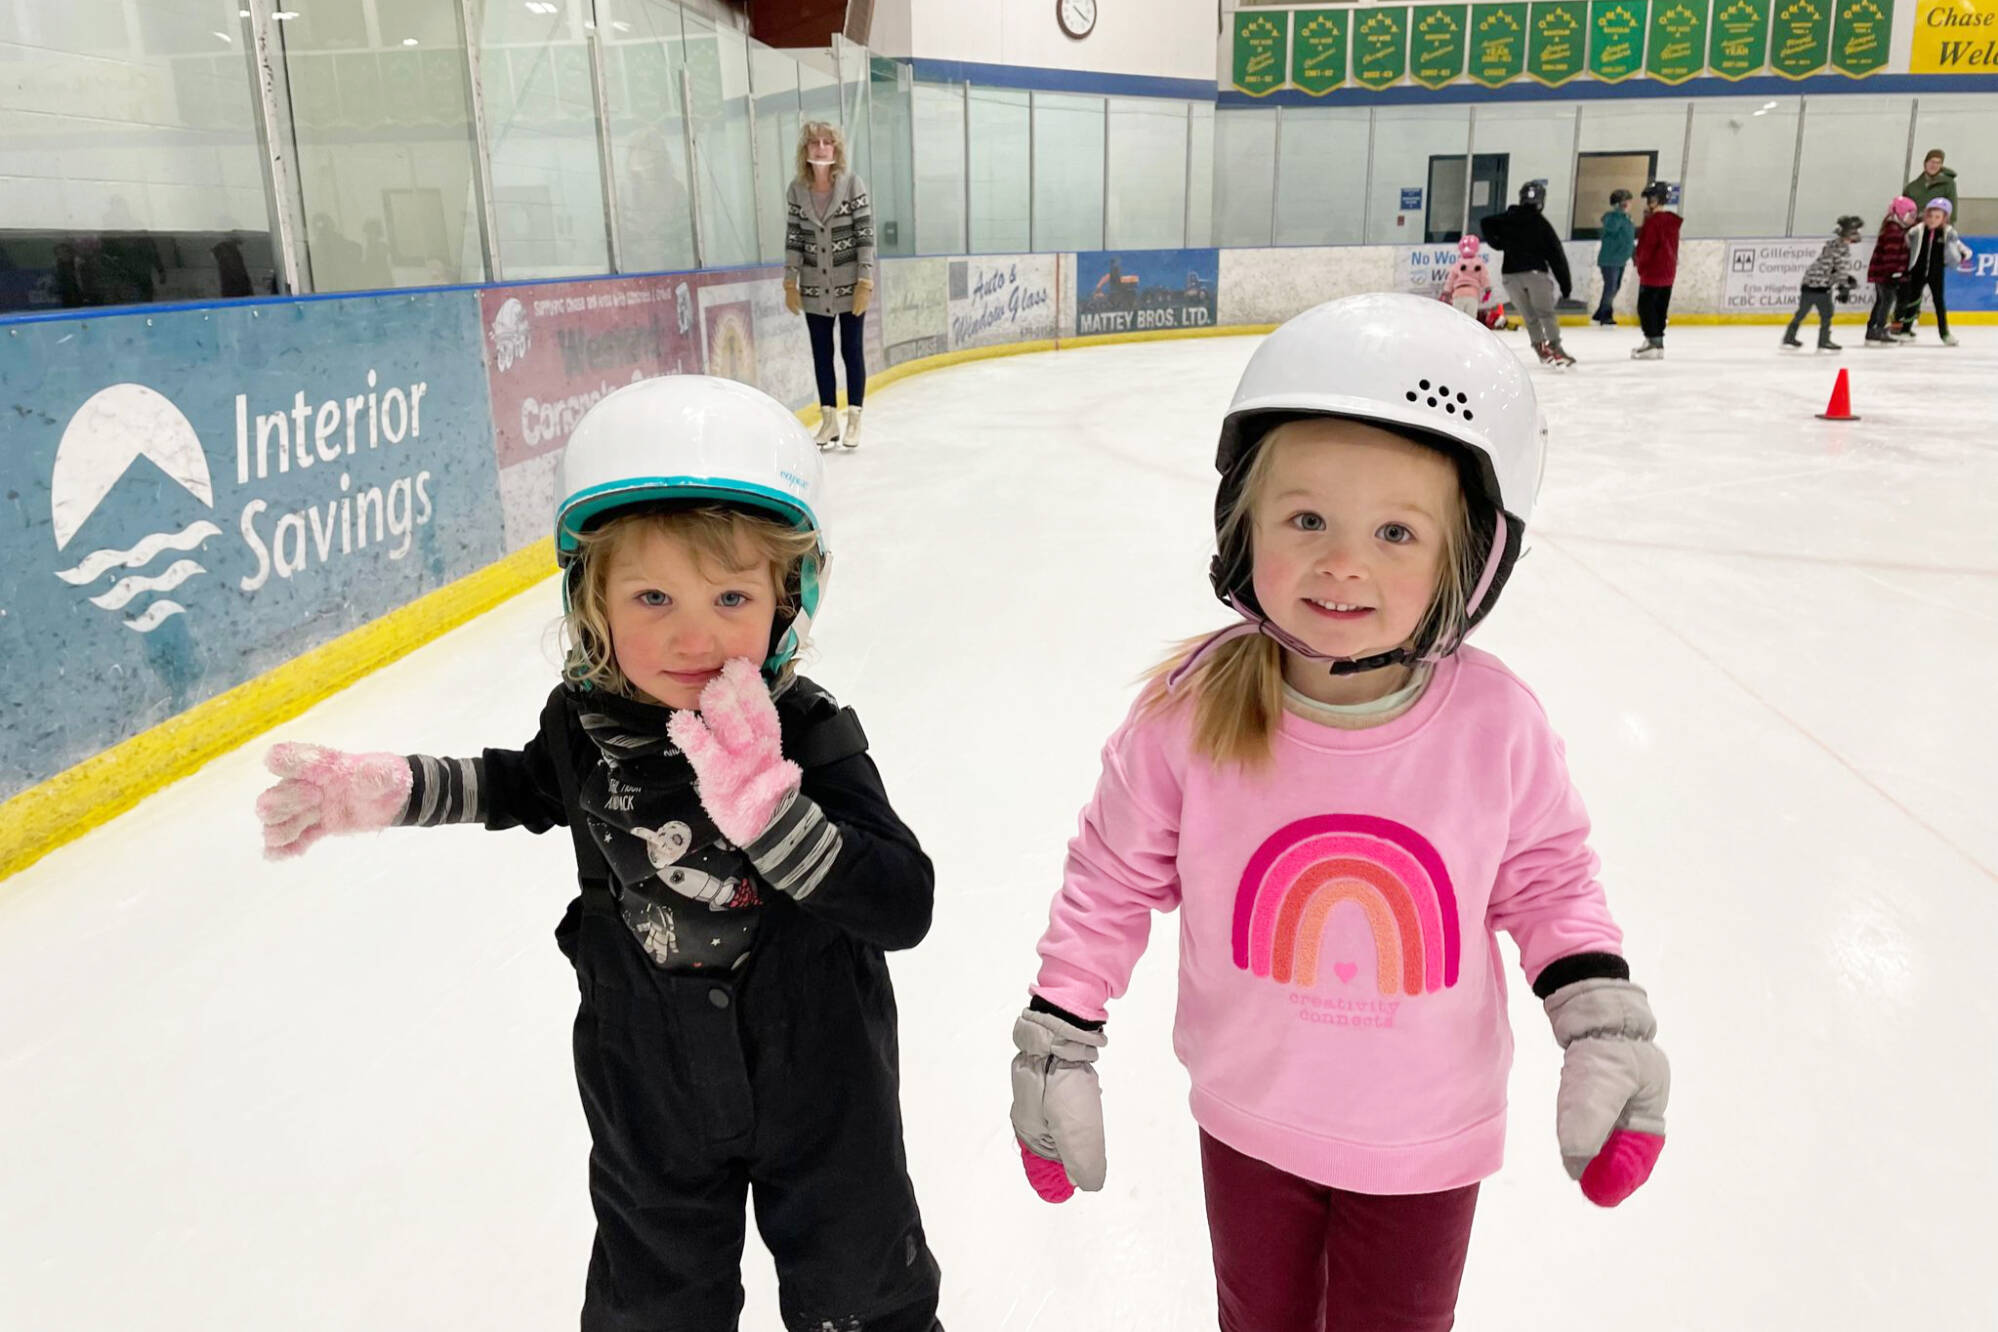 Ari Chouinard and Livie Redel at a figure skating practice at Chase Arena with the Shuswap Skating Club. The club is fundraising to host a Skate Canada Interclub competiton in November 2023 with a teddy bear toss program and more. (Shuswap Skating Club photo)